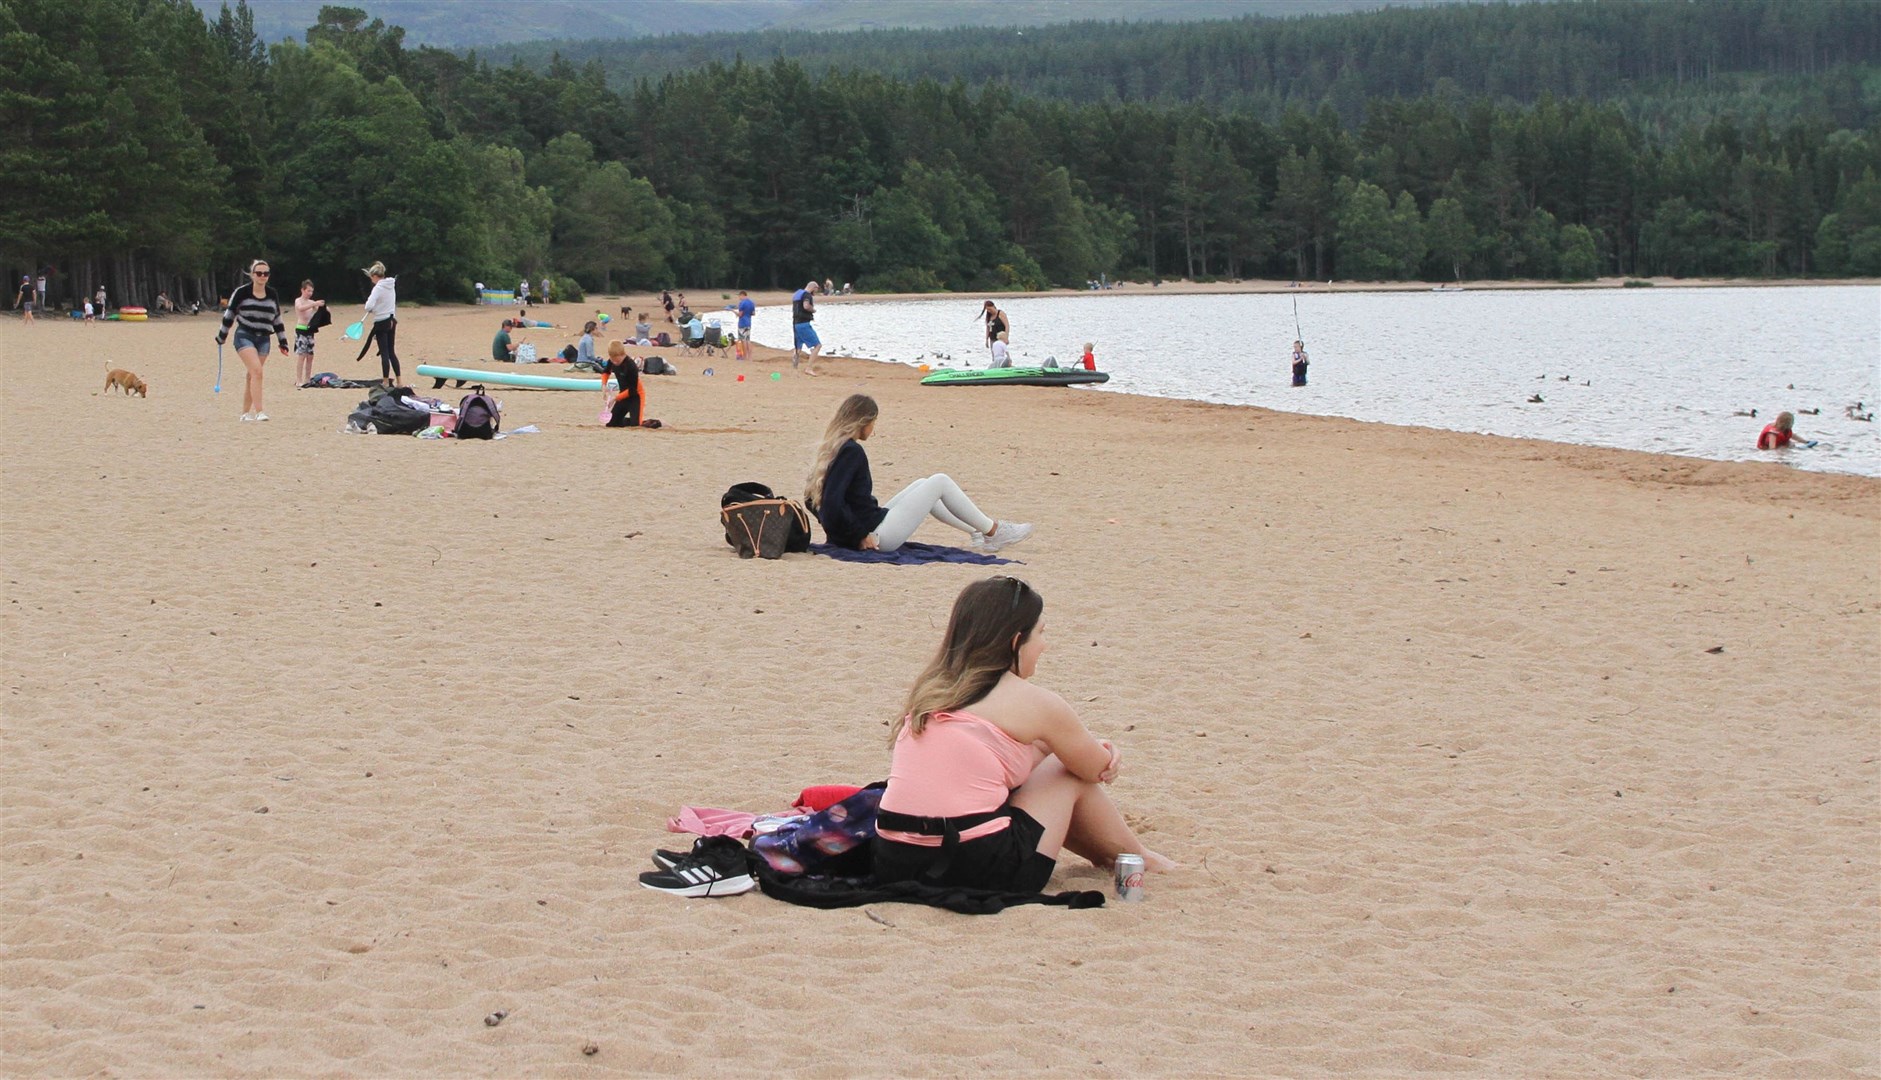 The beach at Loch Morlich is just a short distances from Glenmore Campsite. Scores of thousands of visitors are still expected to visit the beauty spot this summer but there are concerns the lack of facilities will create major problems.